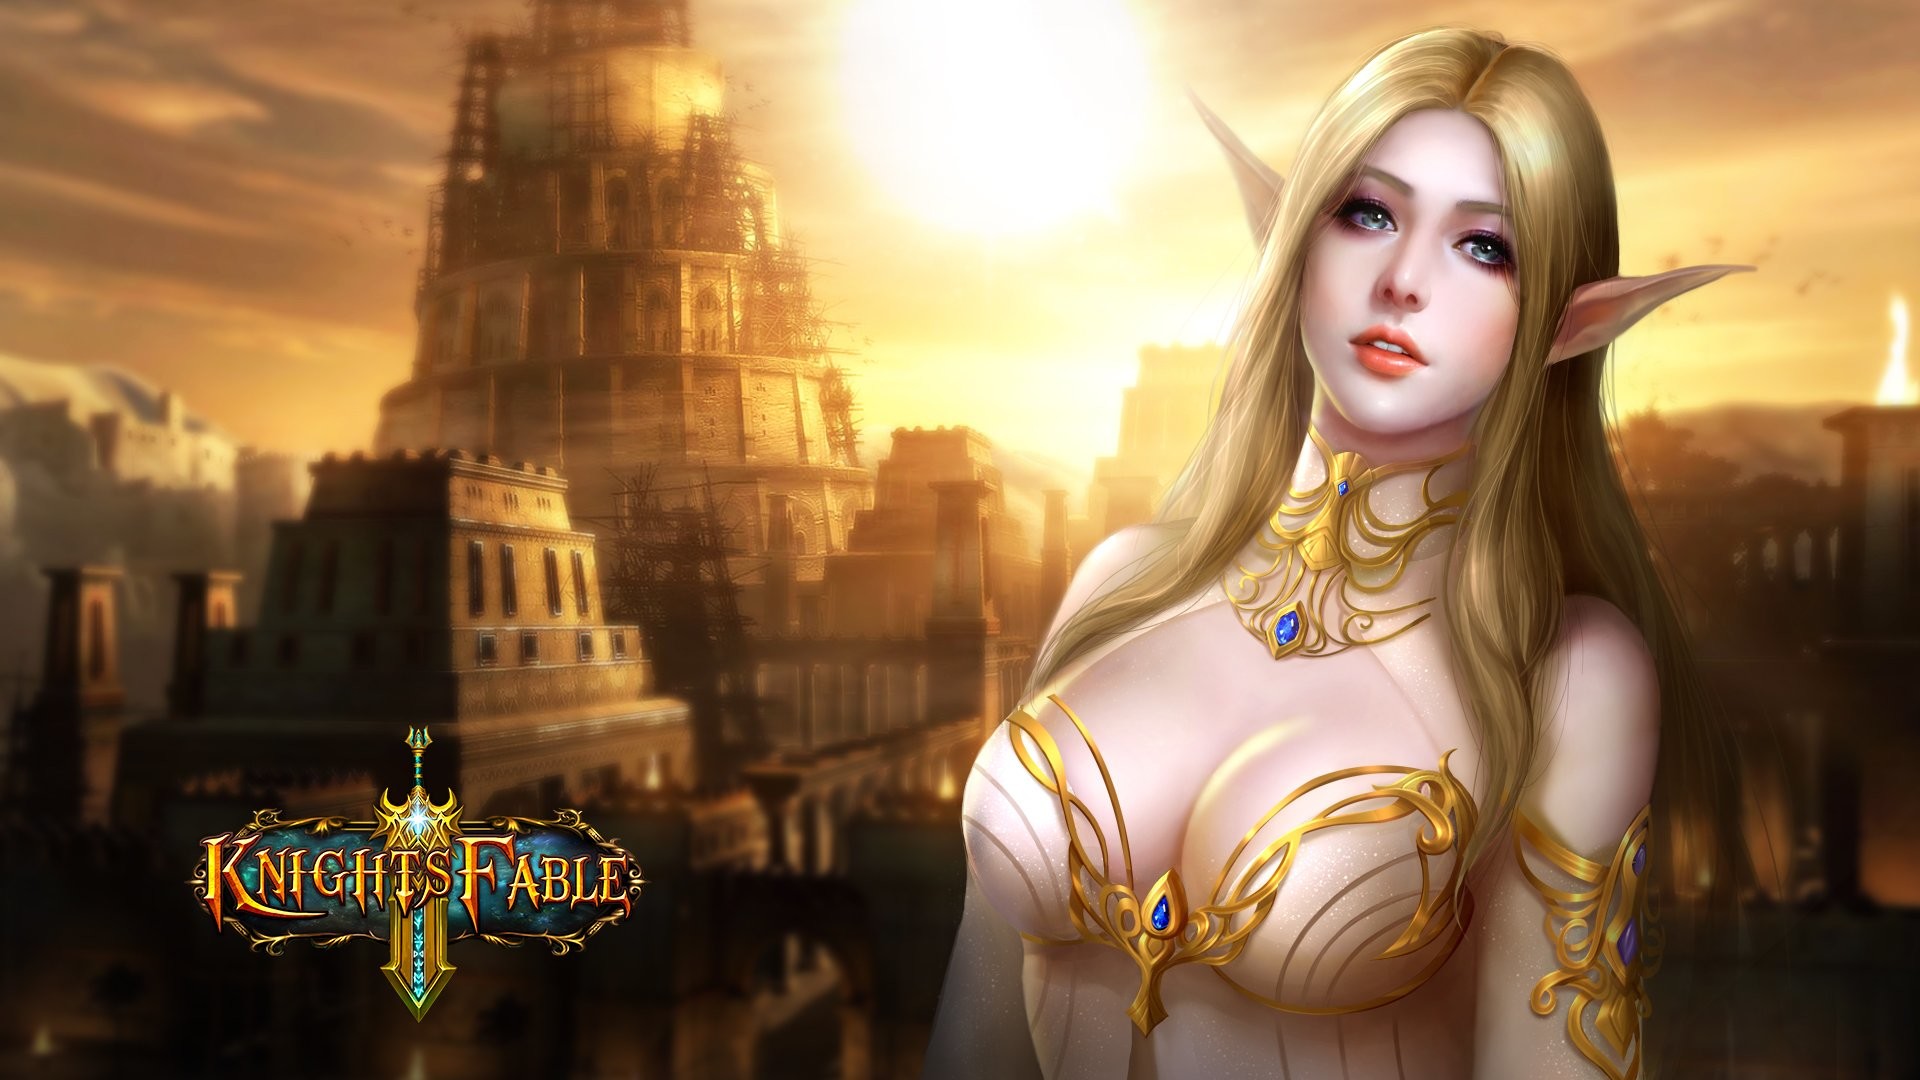 1920x1080 KNIGHTS FABLE fantasy mmo rpg online hero heroes King Arthur action  adventure fighting poster elf elves